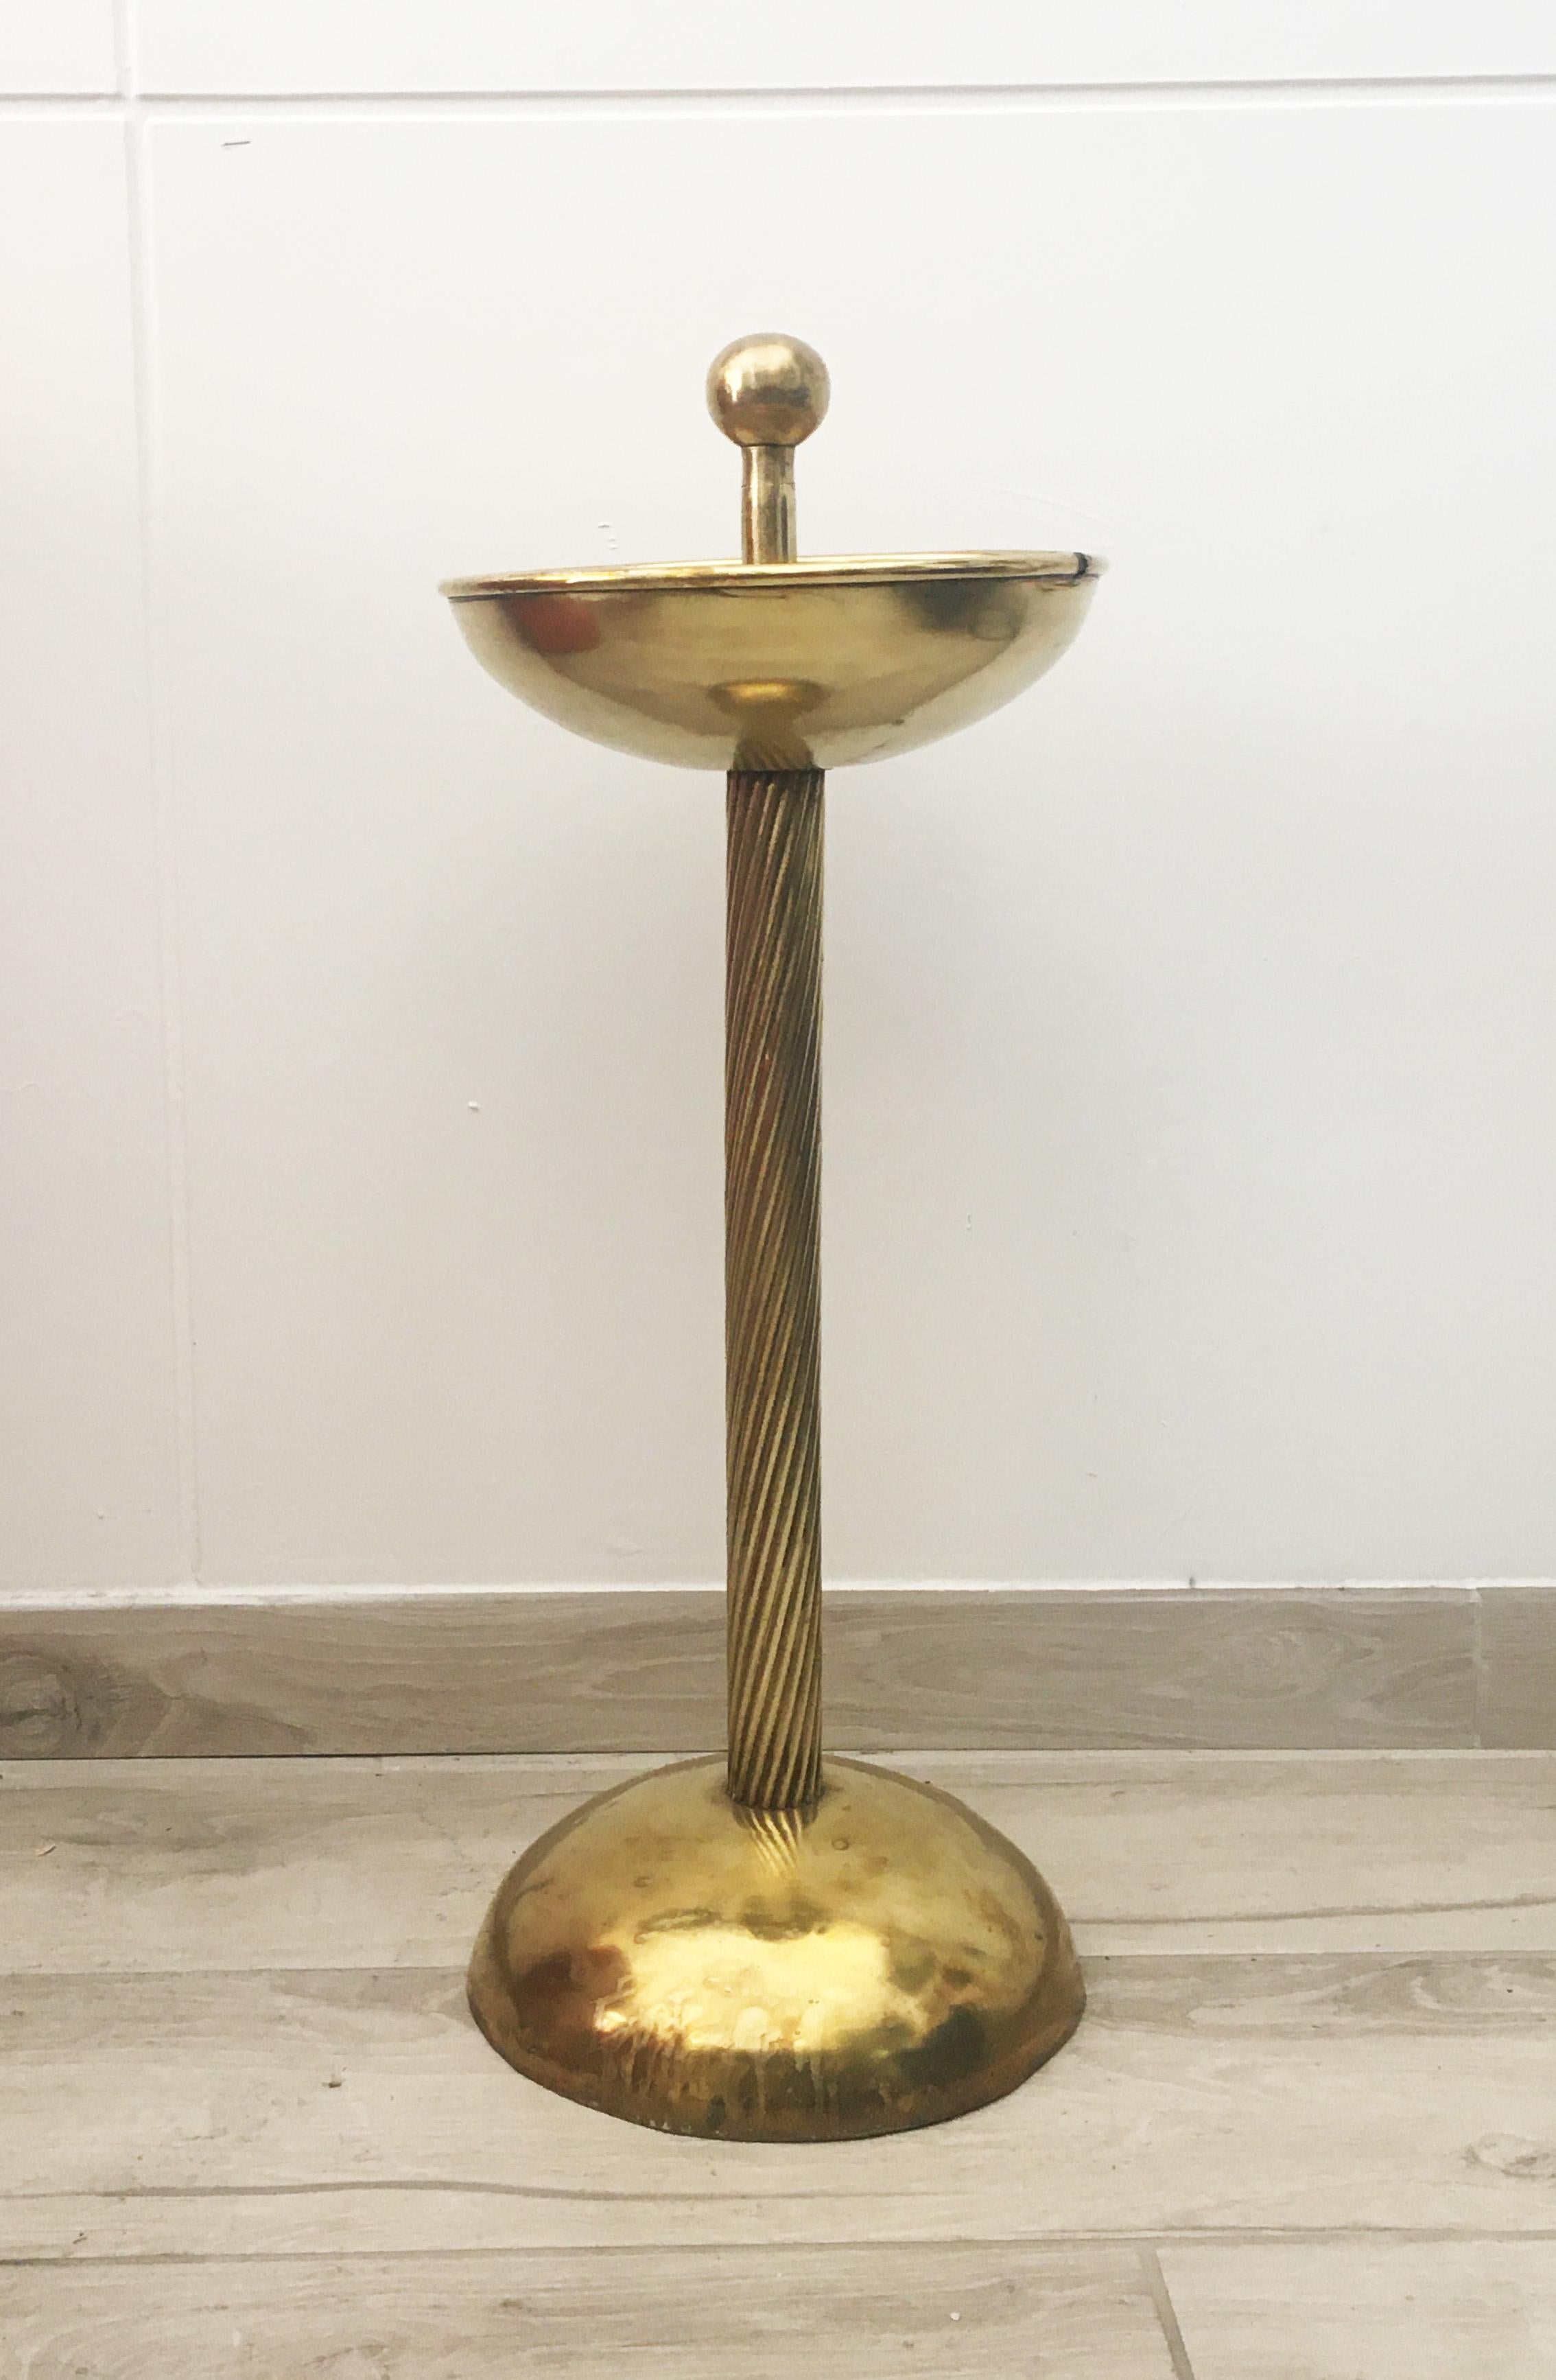 This floor ashtray was made in Italy in the 1950s. It is made of polished brass with a twisted stem.